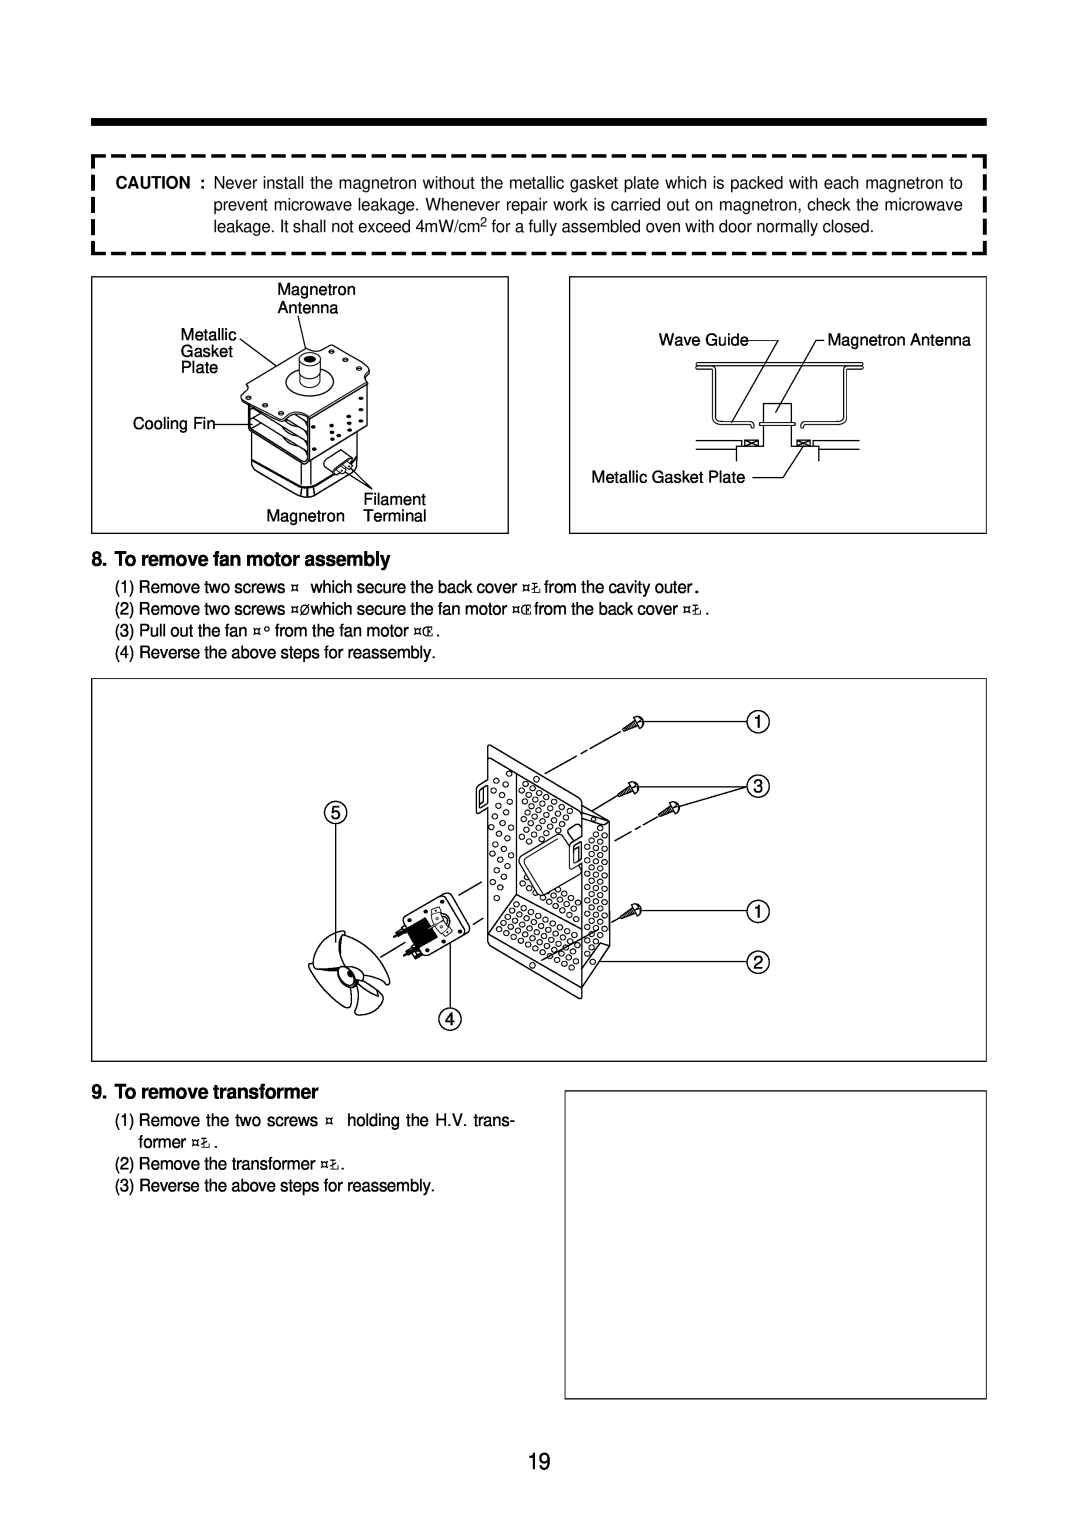 Daewoo KOR-61155, KOR-61151 service manual To remove fan motor assembly, To remove transformer 